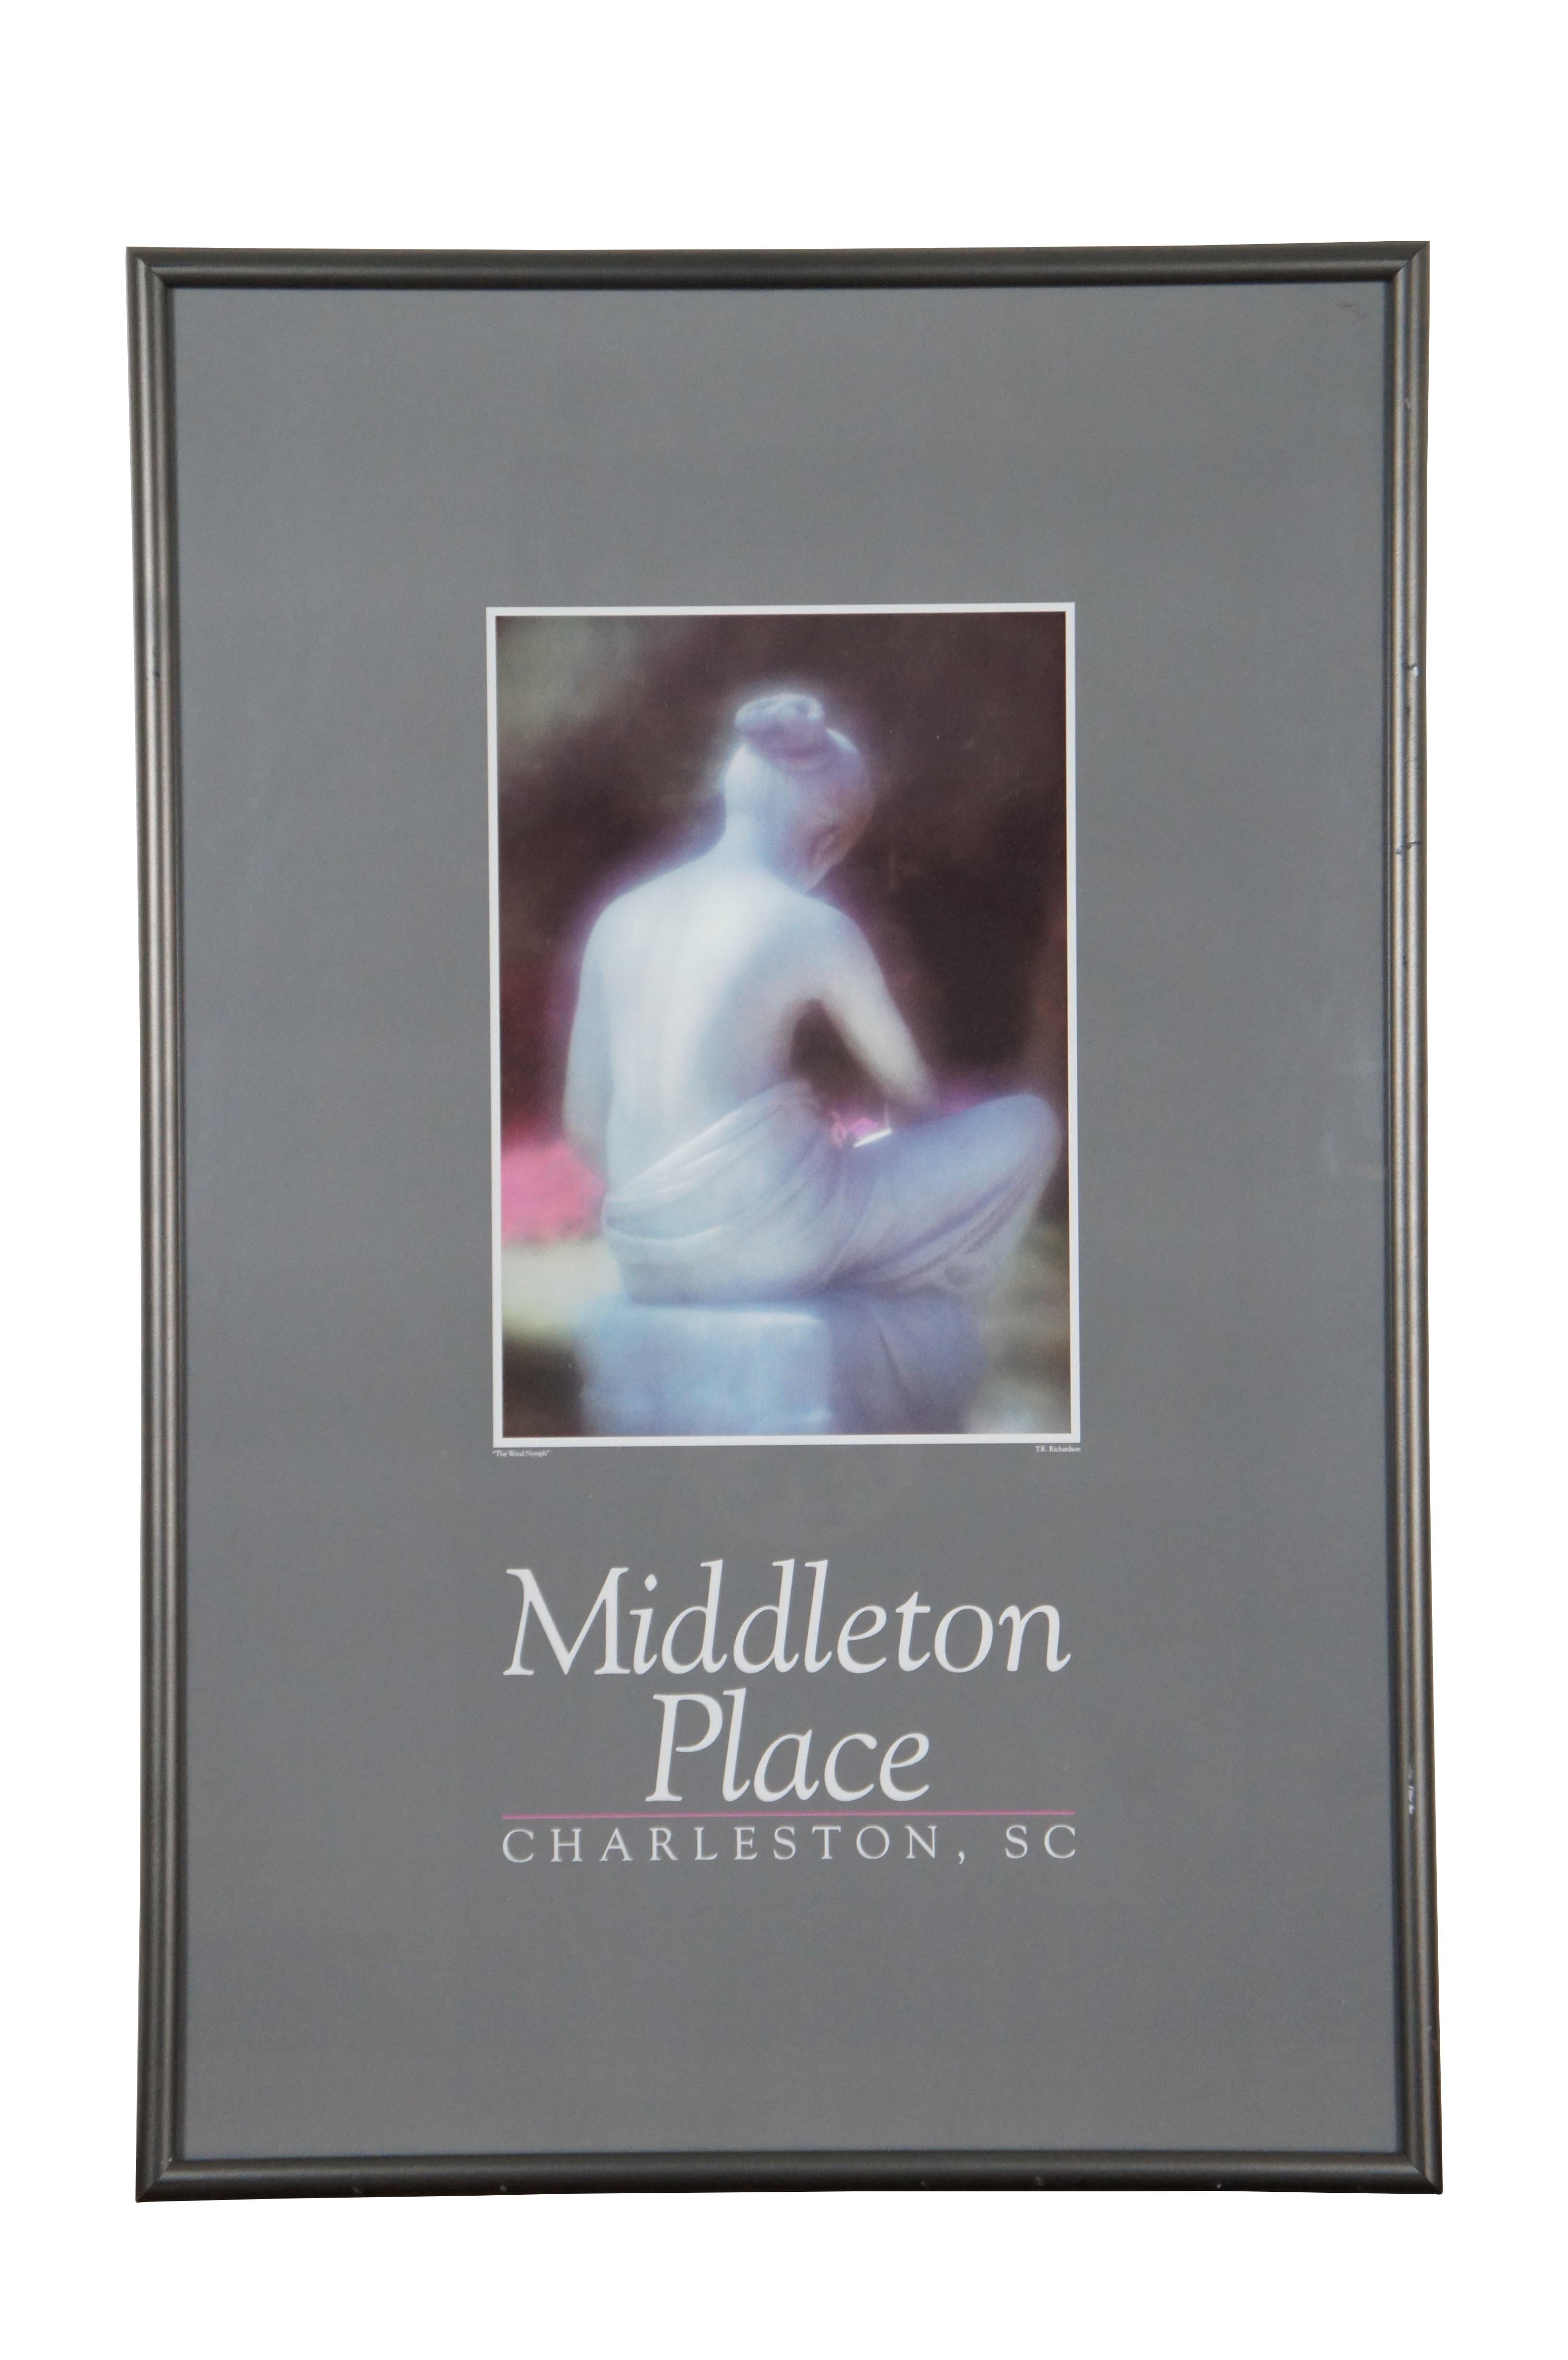 Set of two pieces of art portraying a statue of a Wood Nymph from the gardens of Middleton Place of Charleston, South Carolina. One is a poster advertising the location featuring a photograph by T.R. Richardson. The other is a lithograph print of a